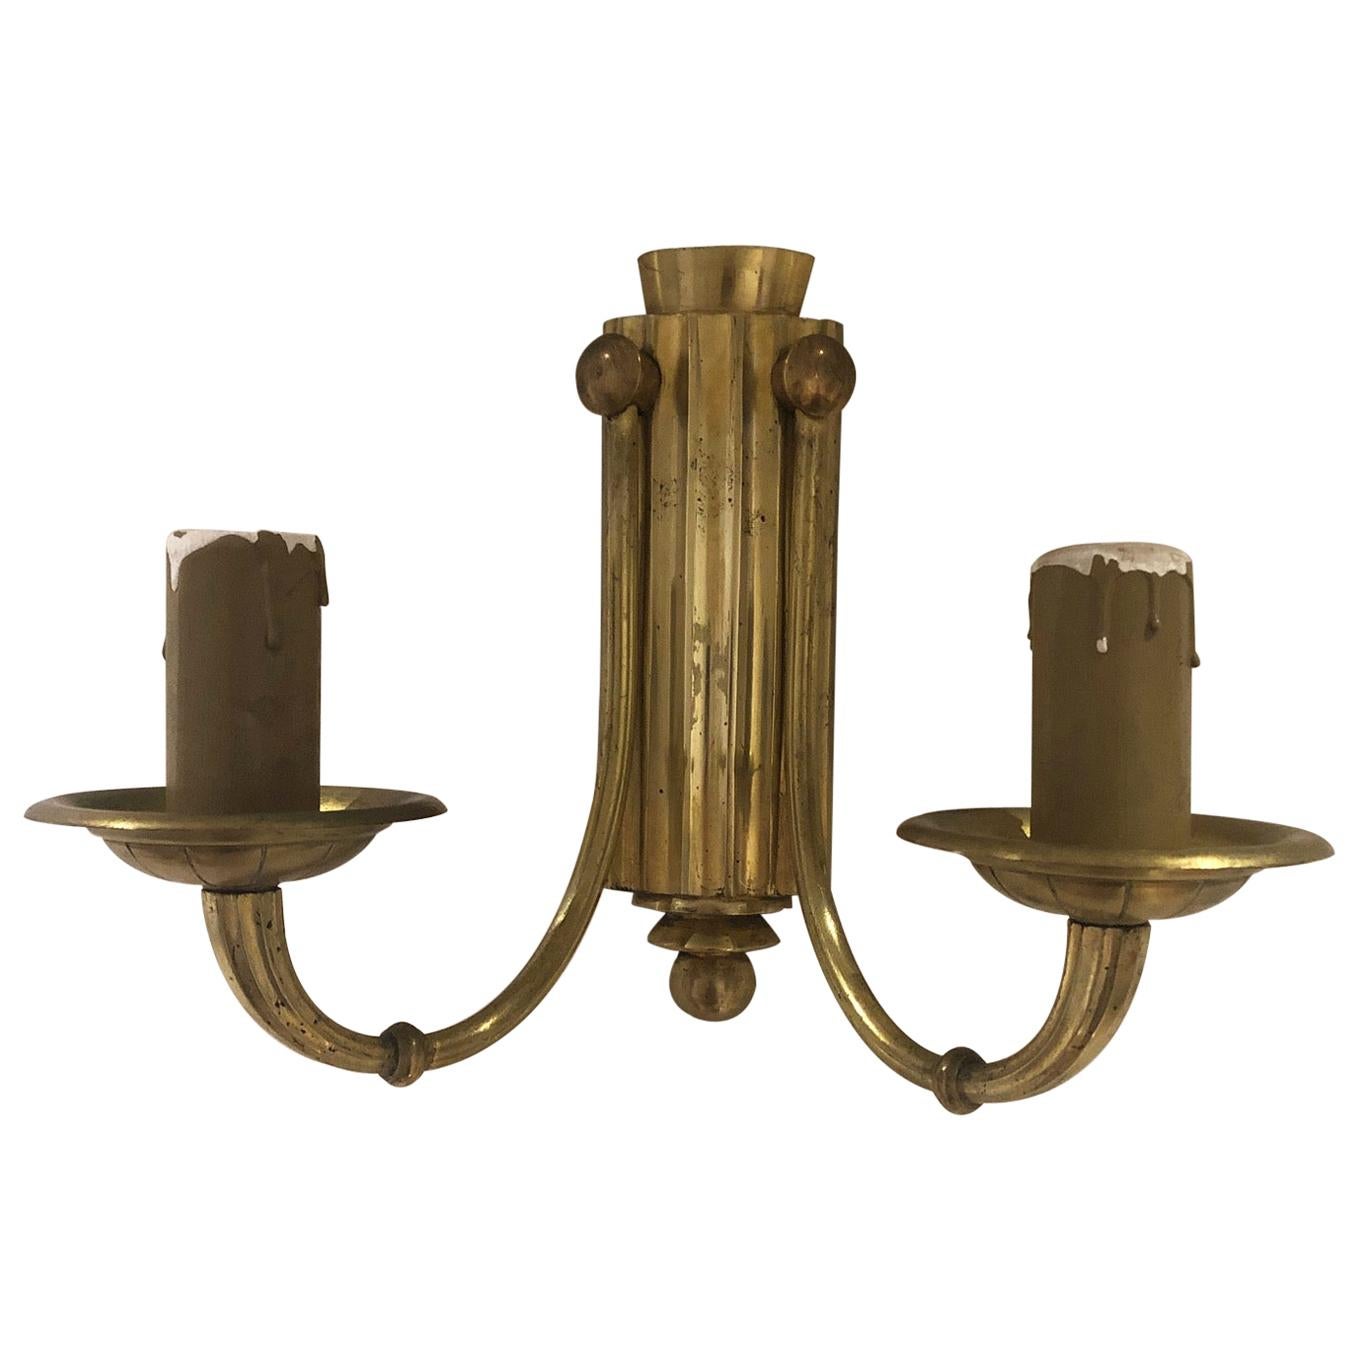 Pair of Art Deco Sconces with Two Lights